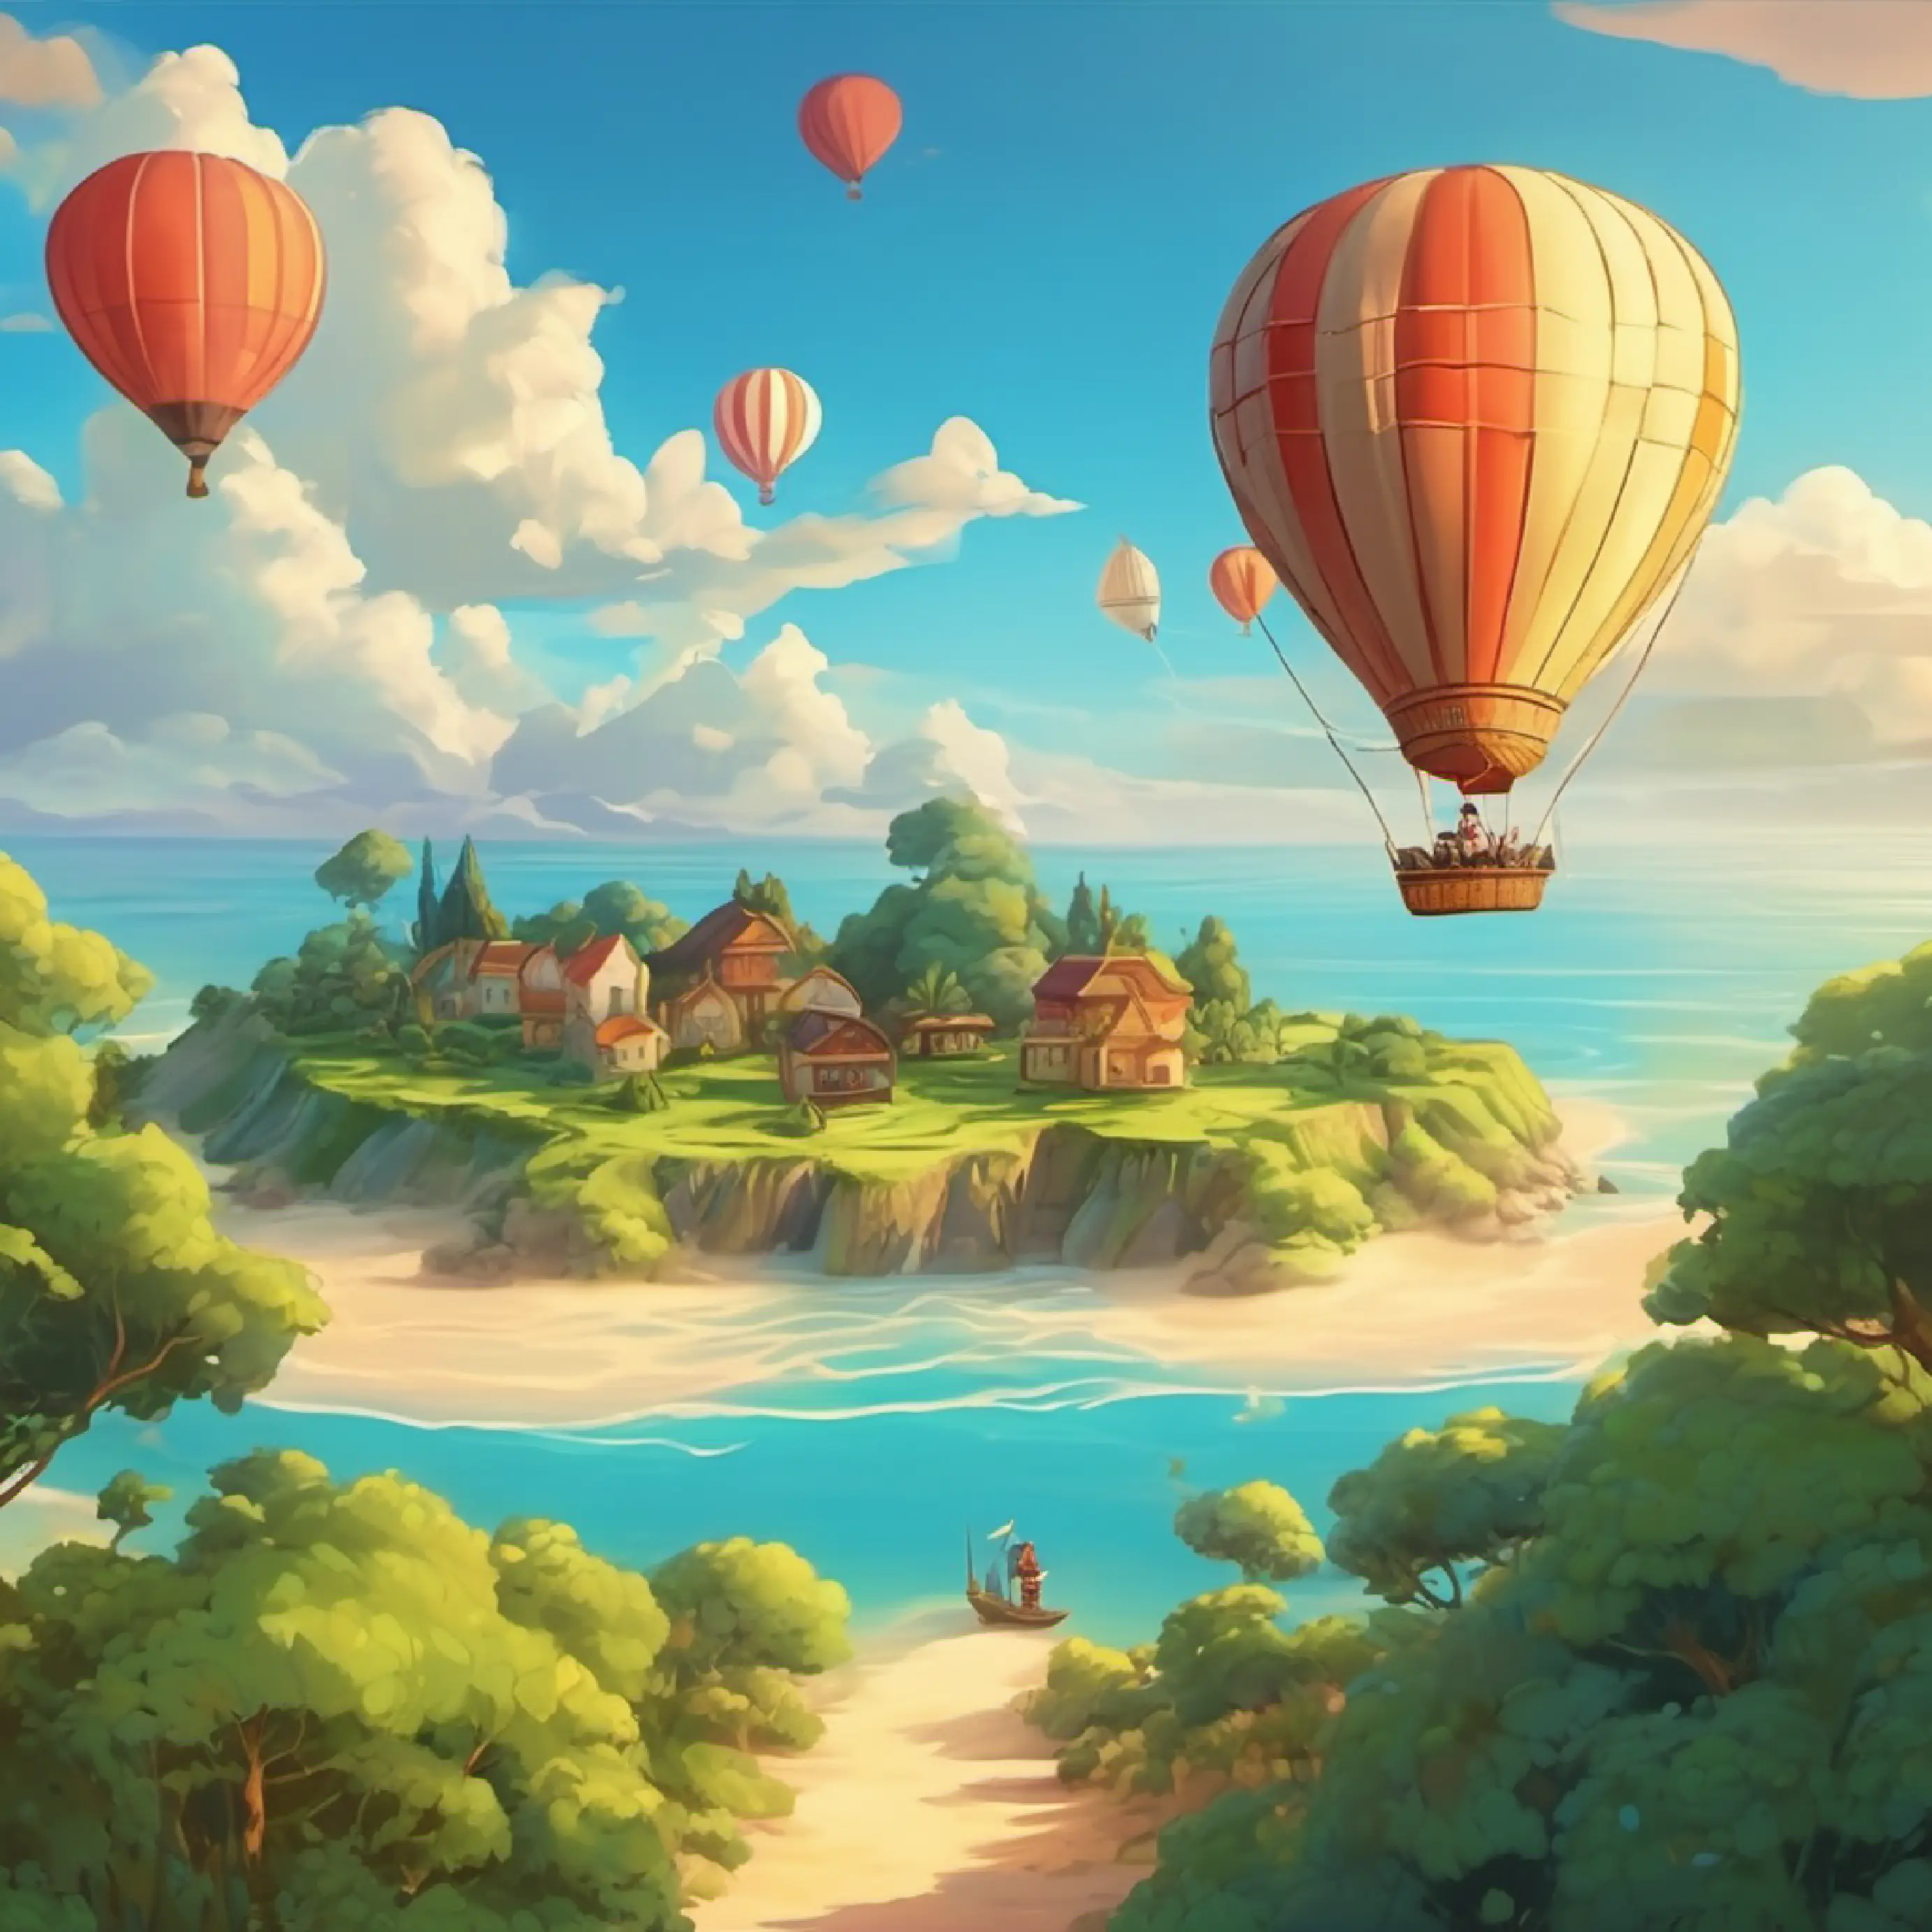 Transition from the ship to a hot air balloon on an island, starting the sky journey.